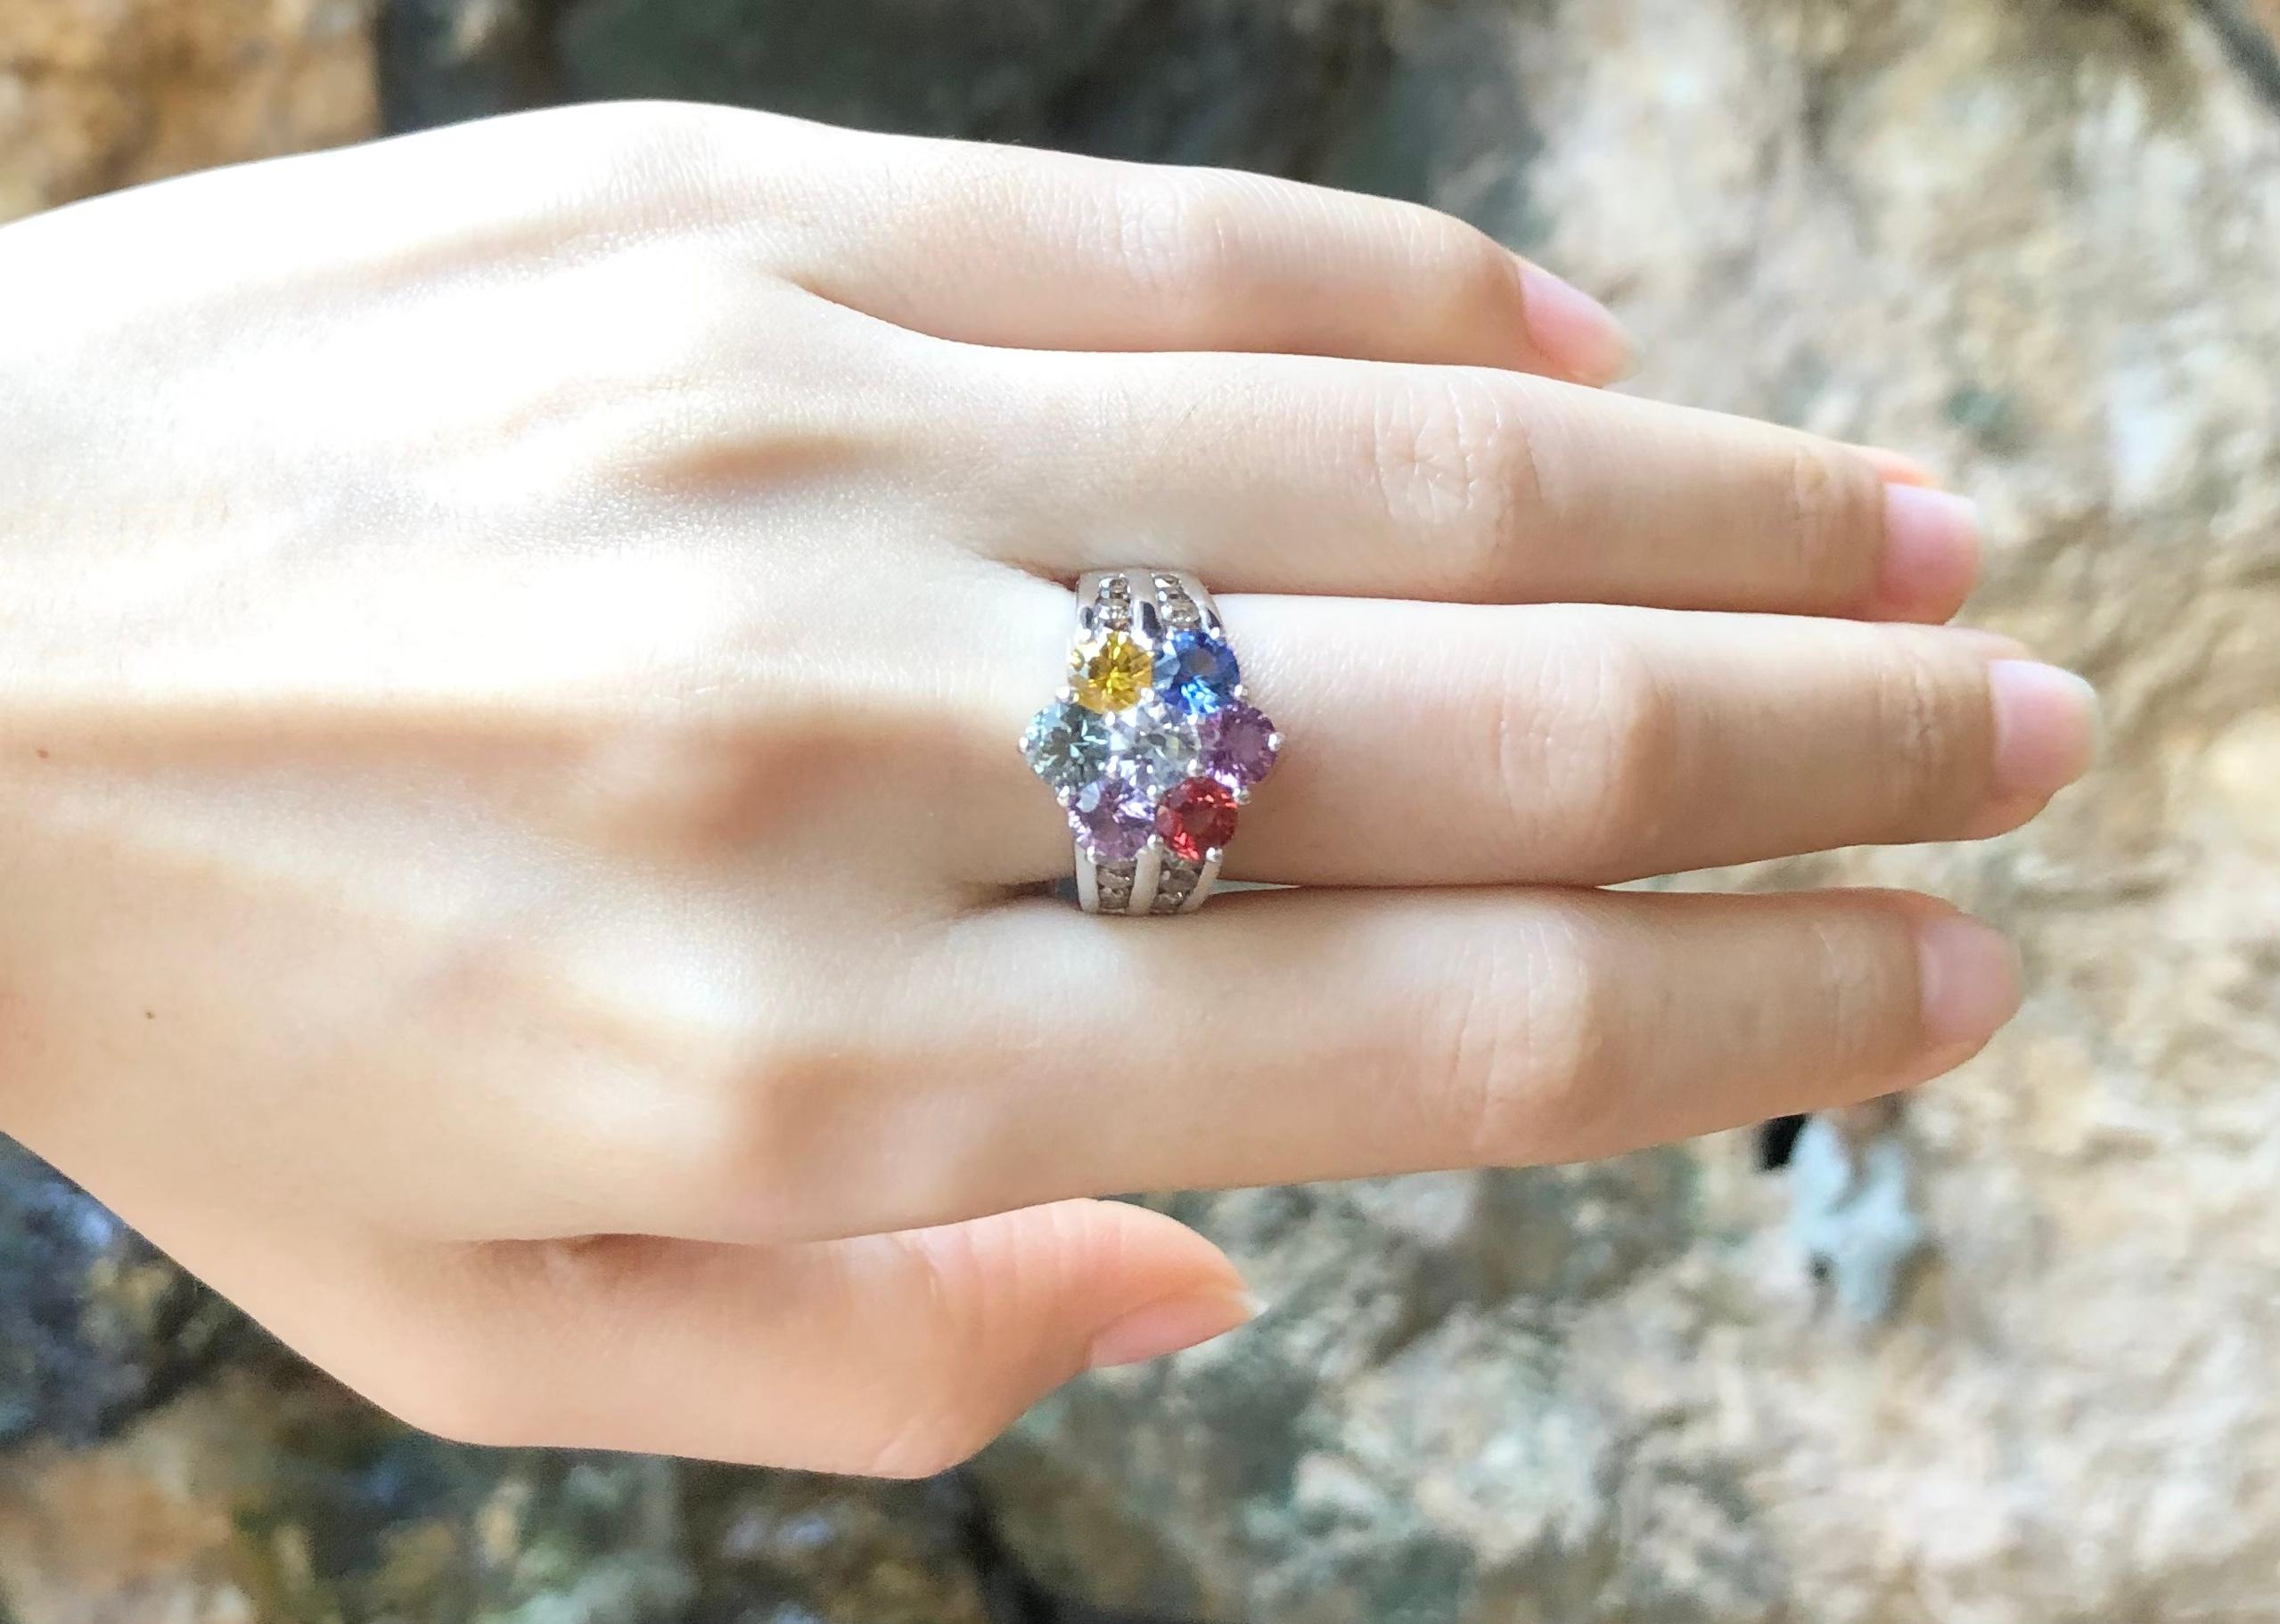 Rainbow Colour Sapphire 3.36 carats with Brown Diamond 0.30 carat Ring set in 18 Karat White Gold Settings

Width:  1.5 cm 
Length: 1.5 cm
Ring Size: 54
Total Weight: 9.63 grams


